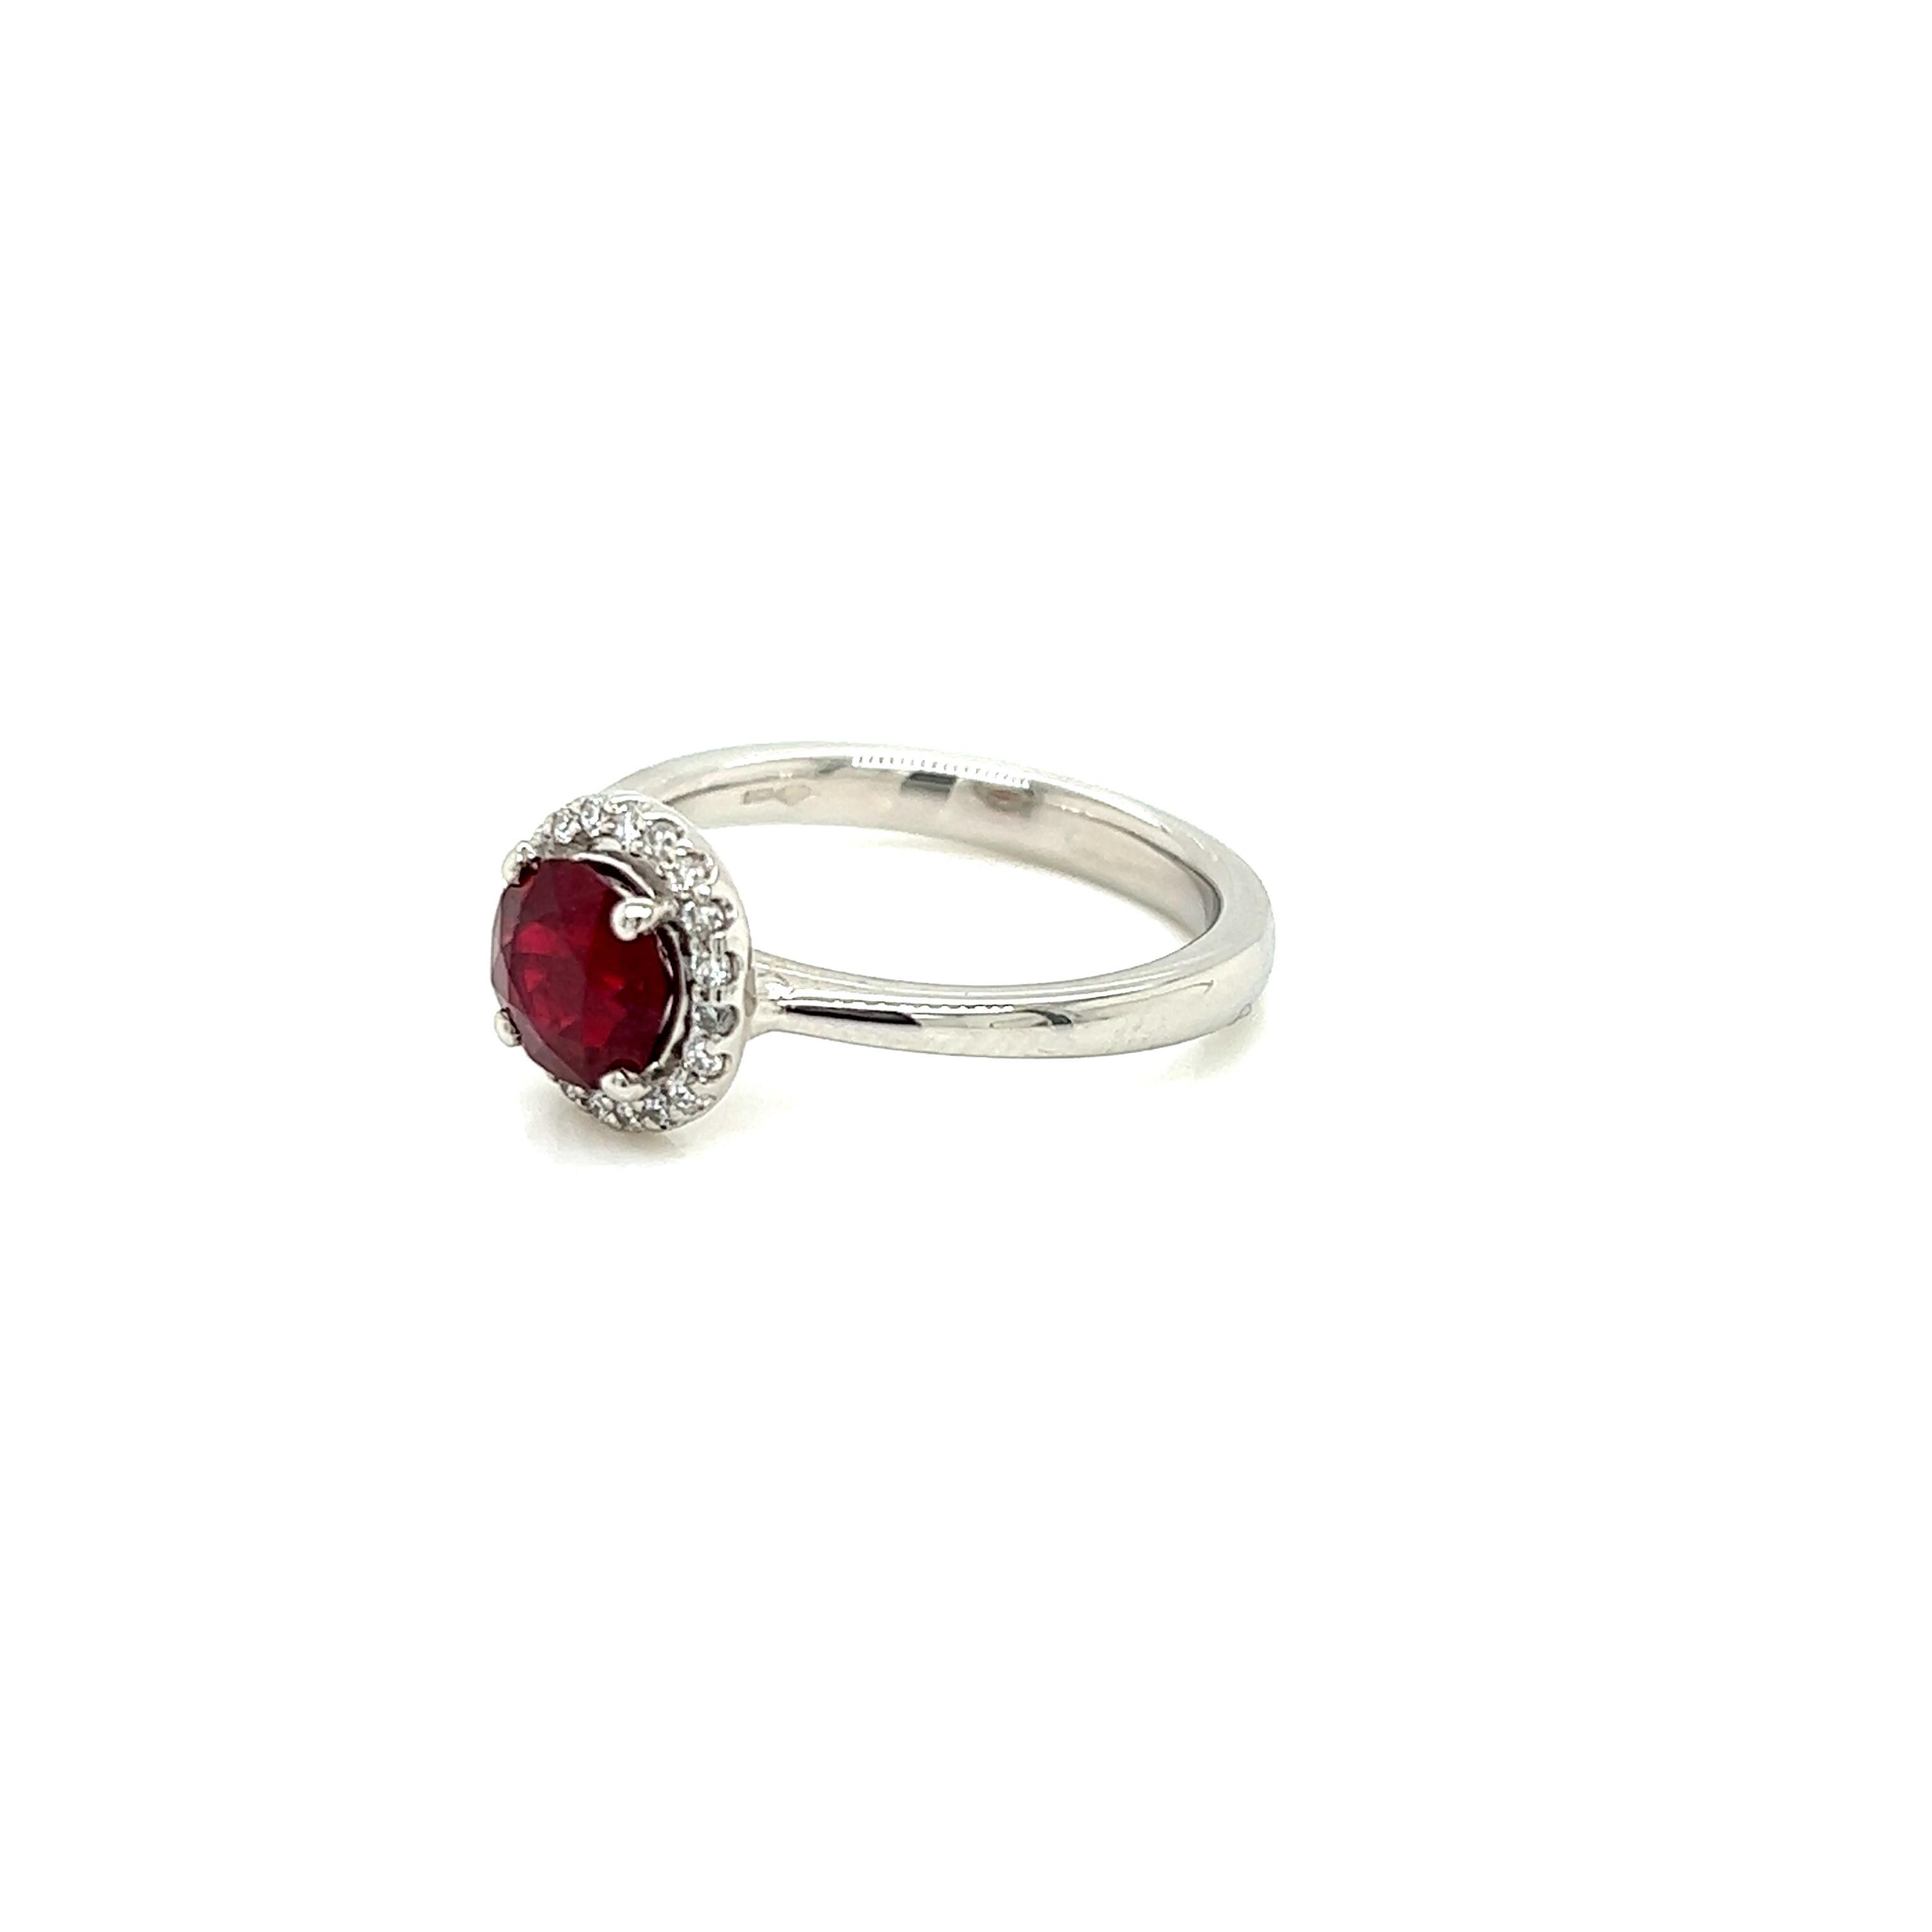 This opulent Platinum ring features a regal 1.05 carat round brilliant Ruby at its centre. Surrounding it is a halo of iridescent Diamonds weighing 0.12 carats.

The Ruby is a brilliant, deep, vivid red. Its rich tones are brought out by the